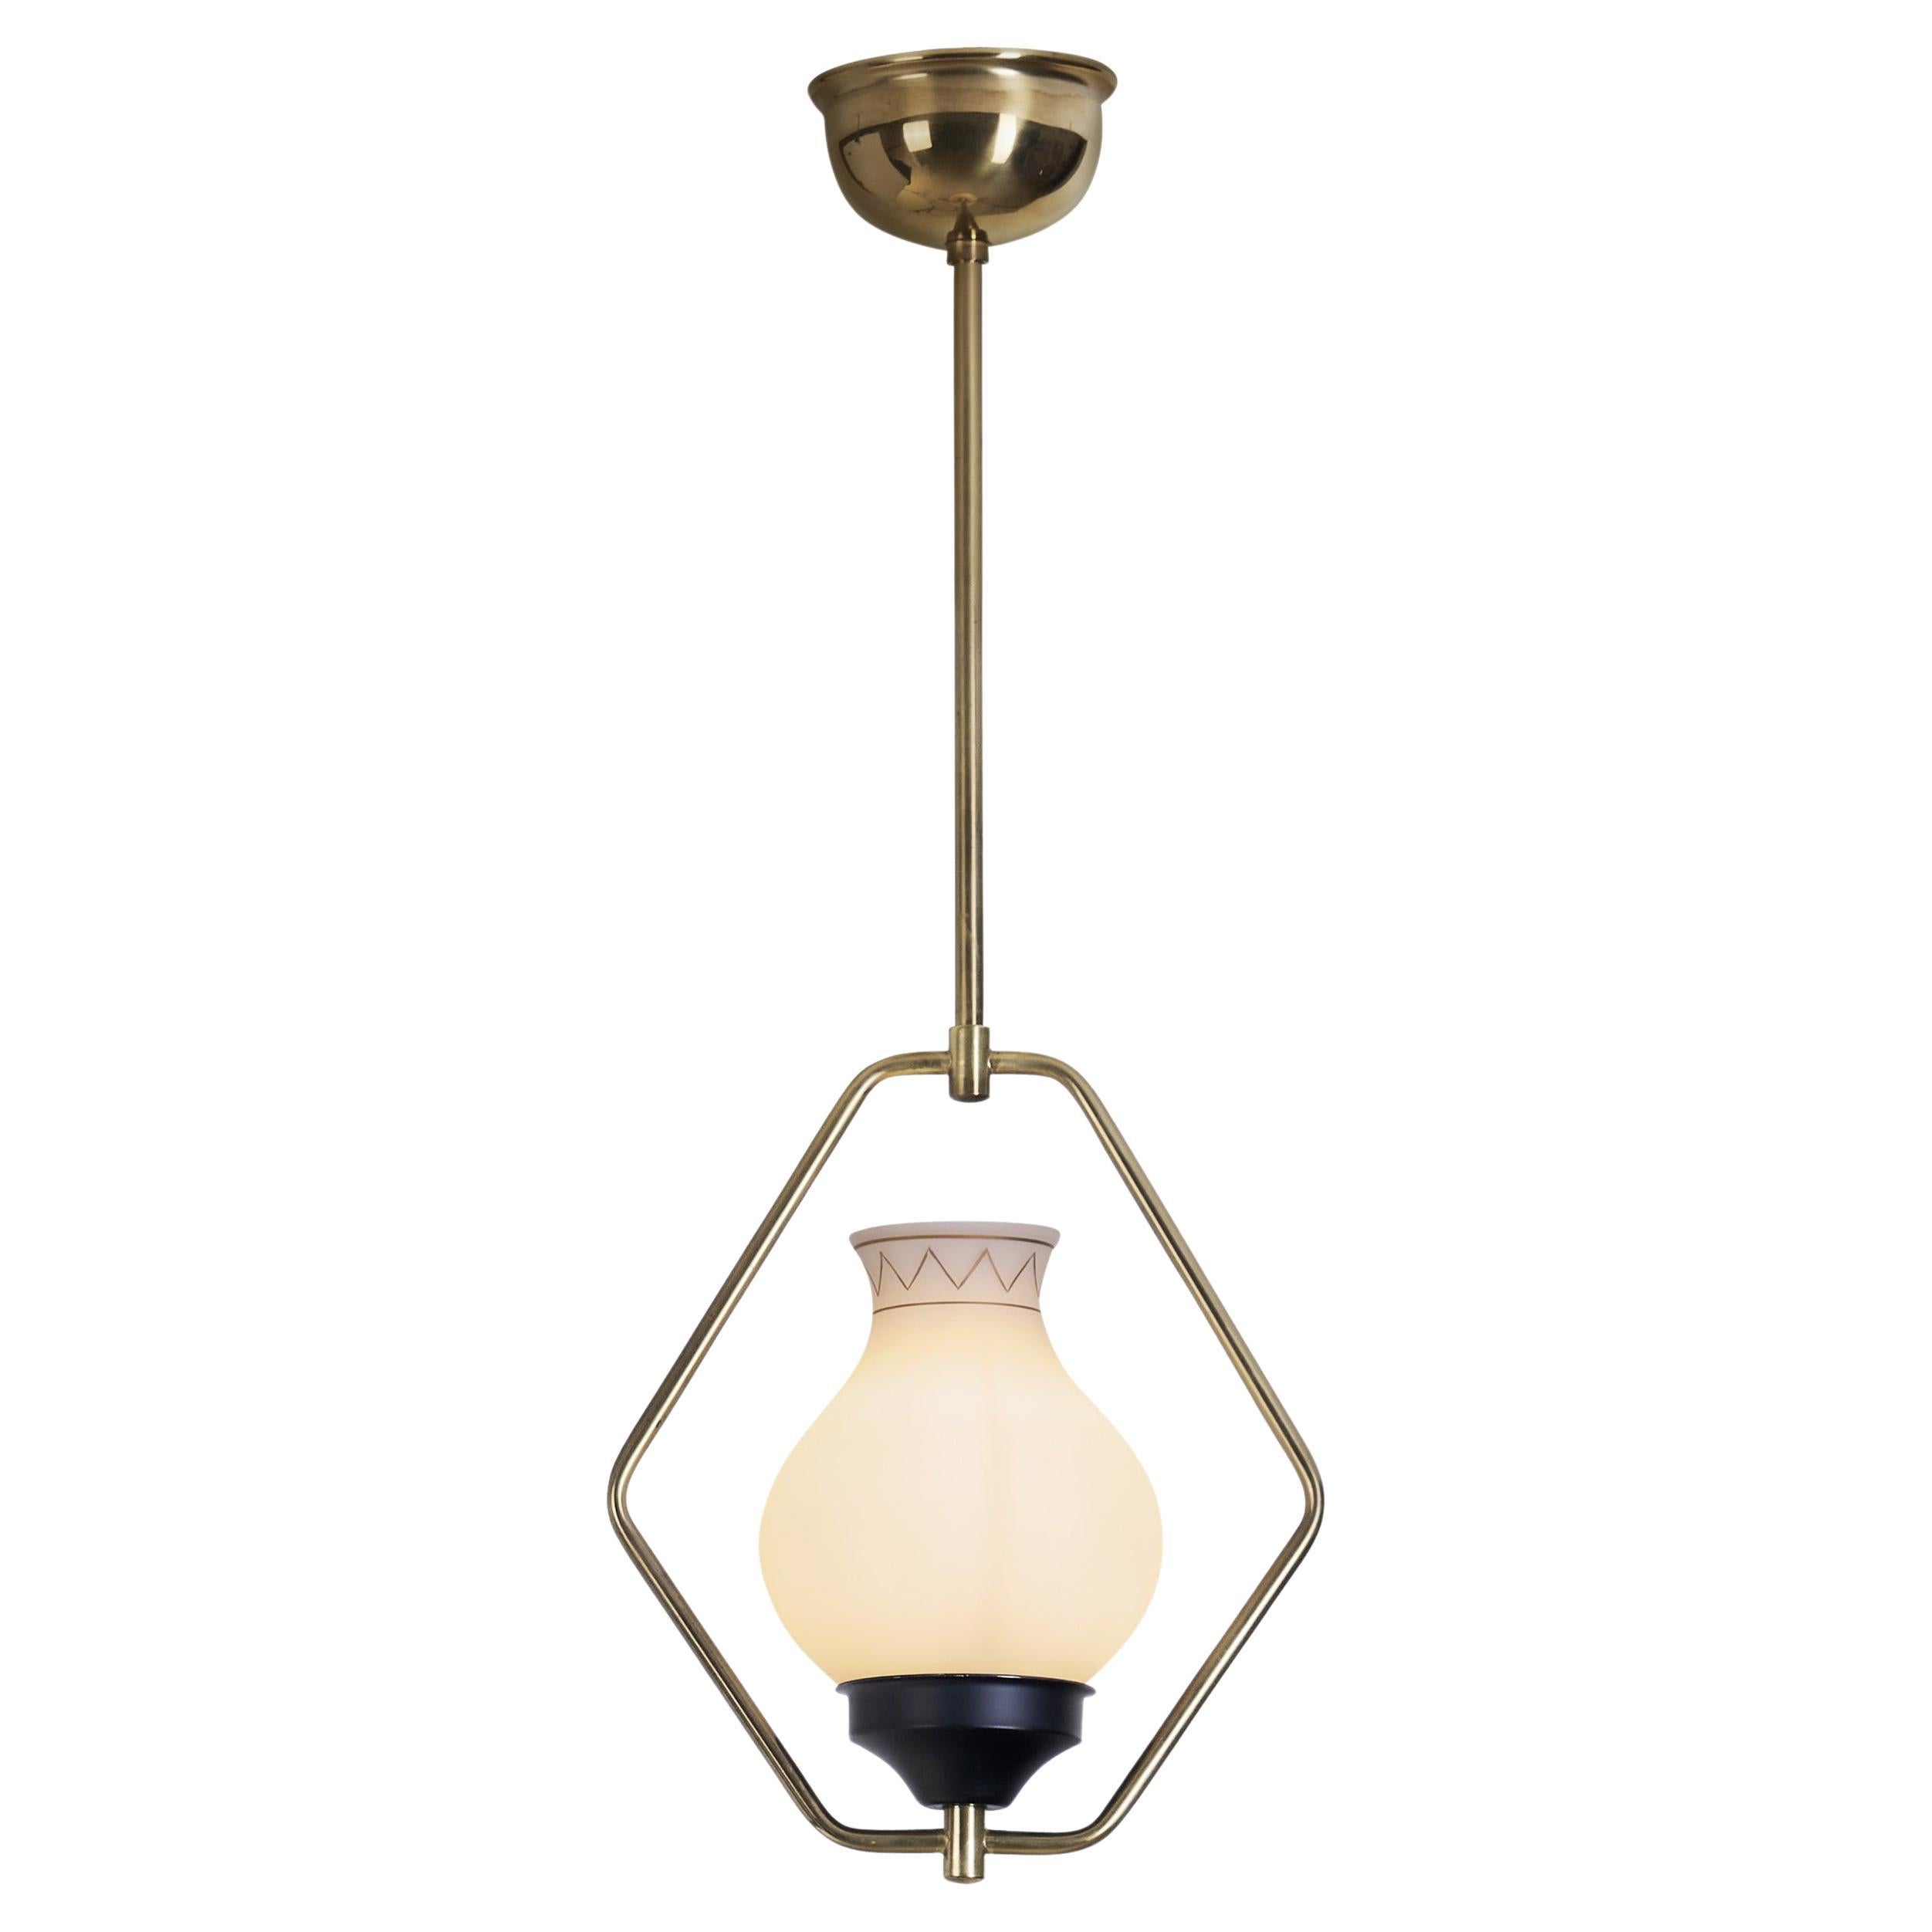 Brass and Opaque Glass Ceiling Lamp, Europe ca 1950s For Sale